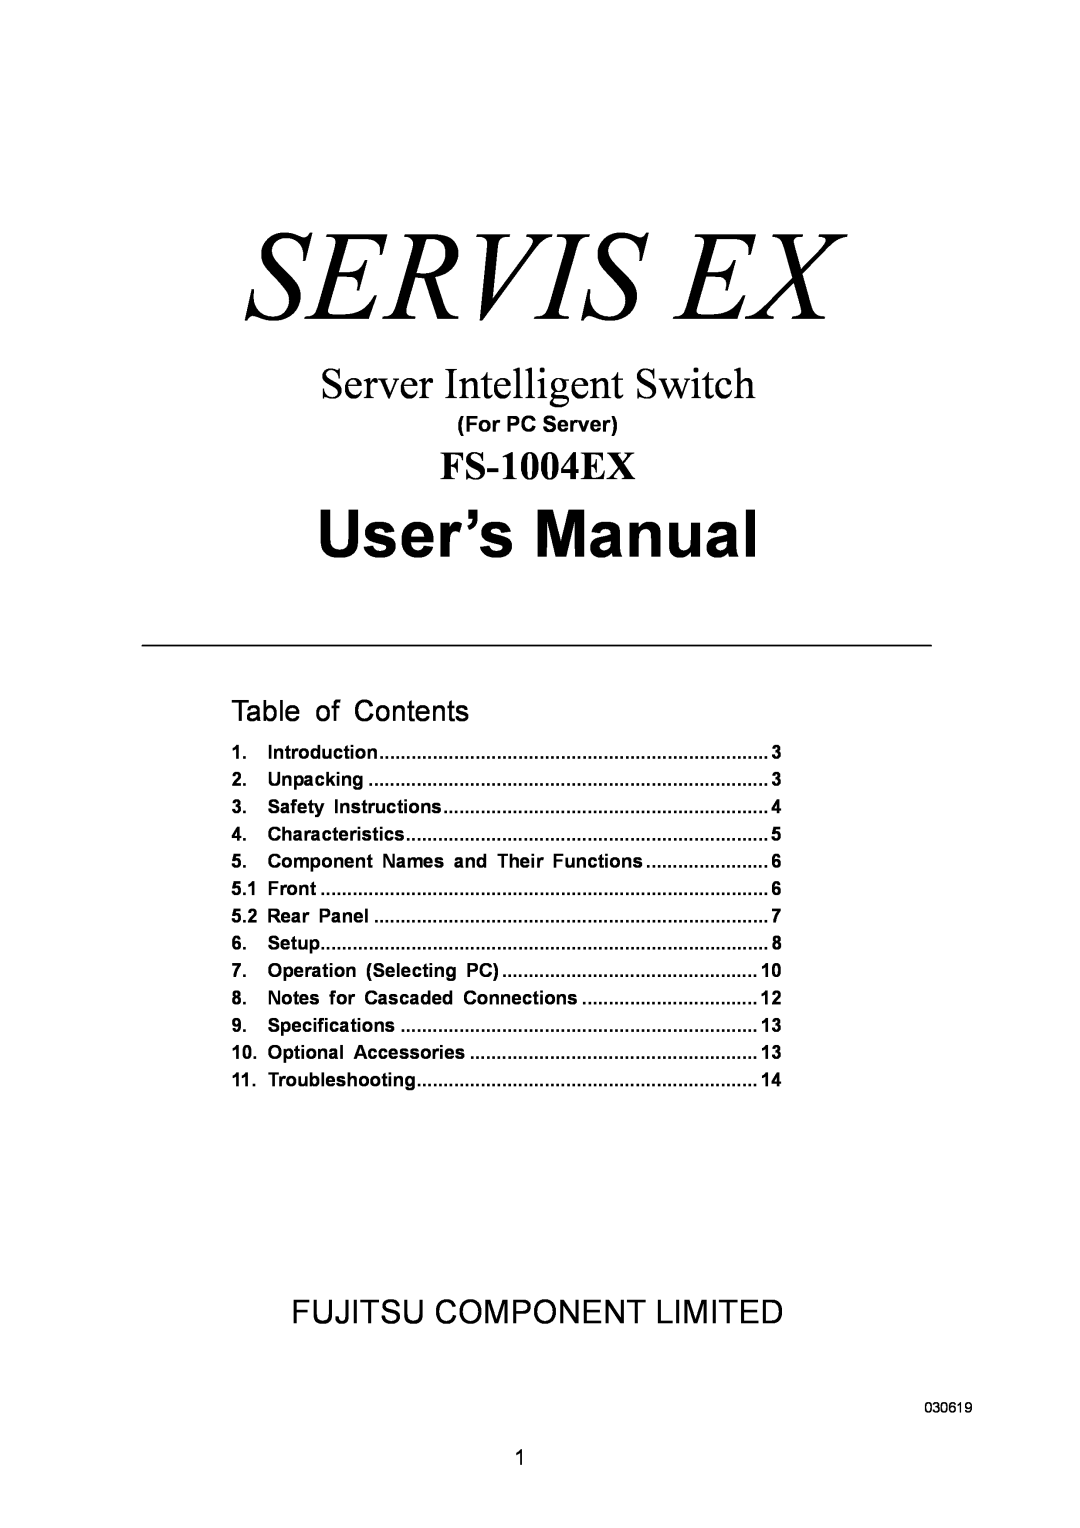 Fujitsu FS-1004EX user manual For PC Server, Servis Ex, User’s Manual, Server Intelligent Switch, Table of Contents, Front 